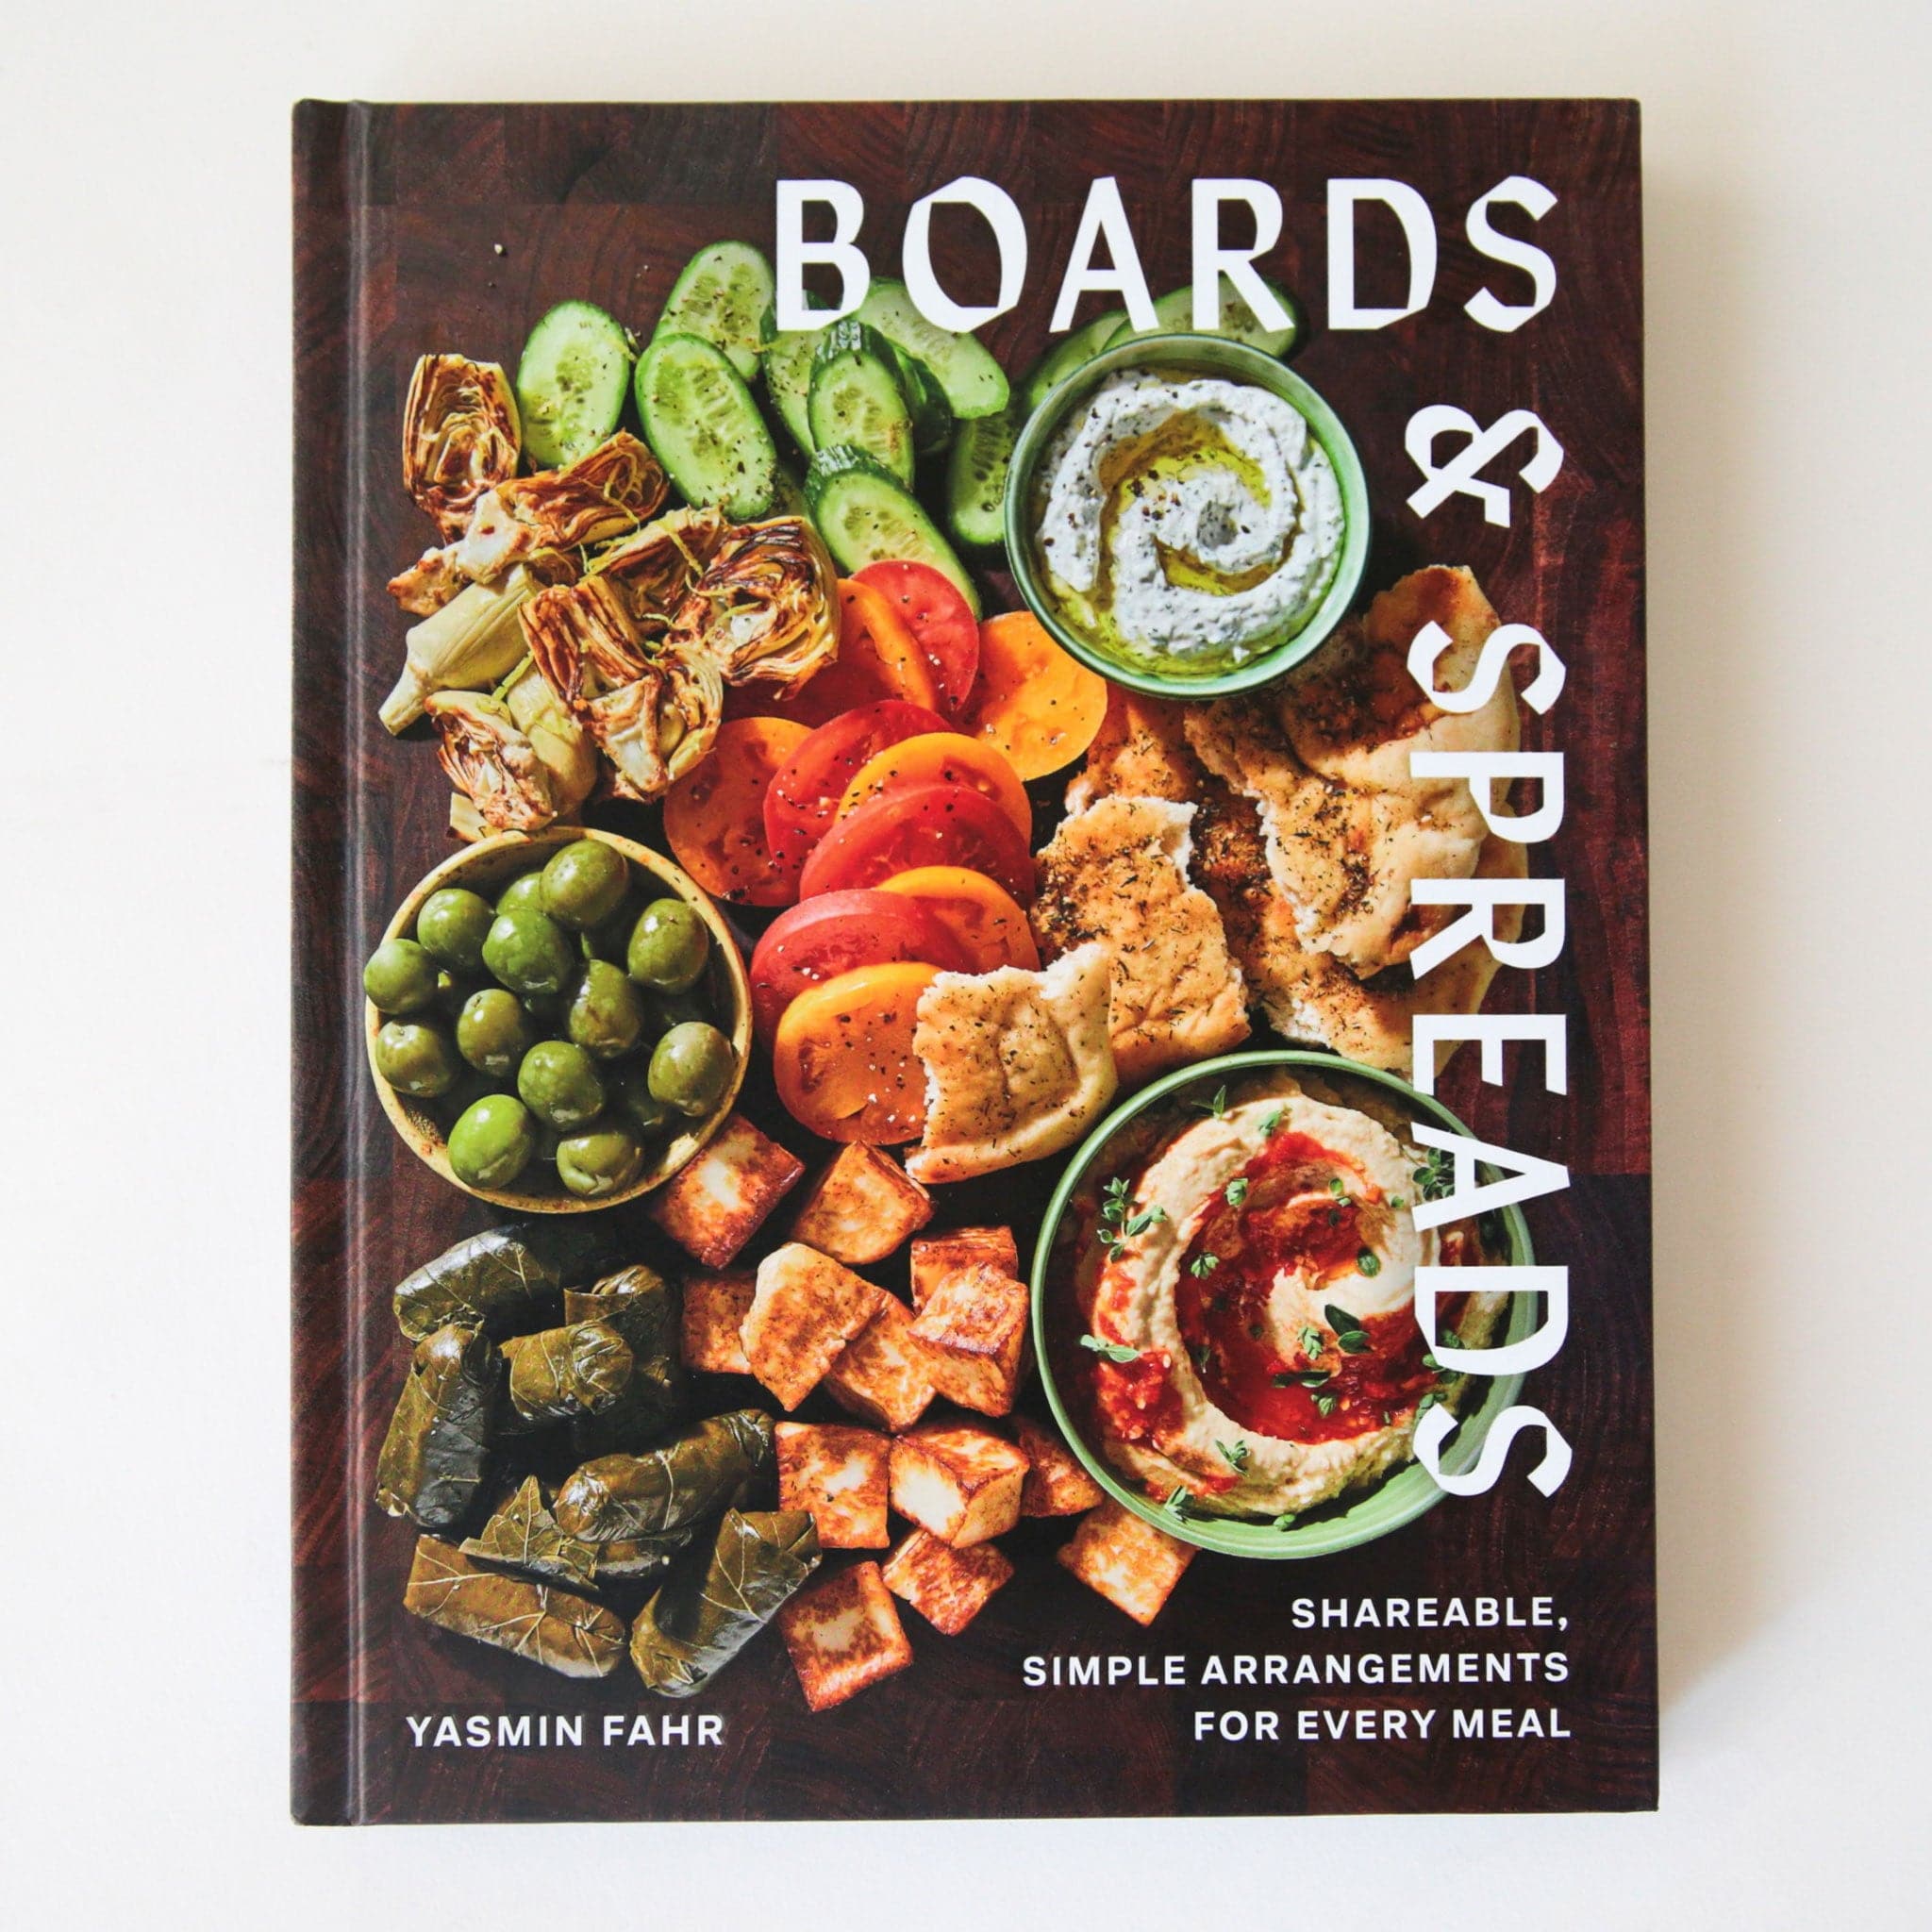 Charcuterie Boards: Platters, Boards, Plates and Simple Recipes to Share [Book]